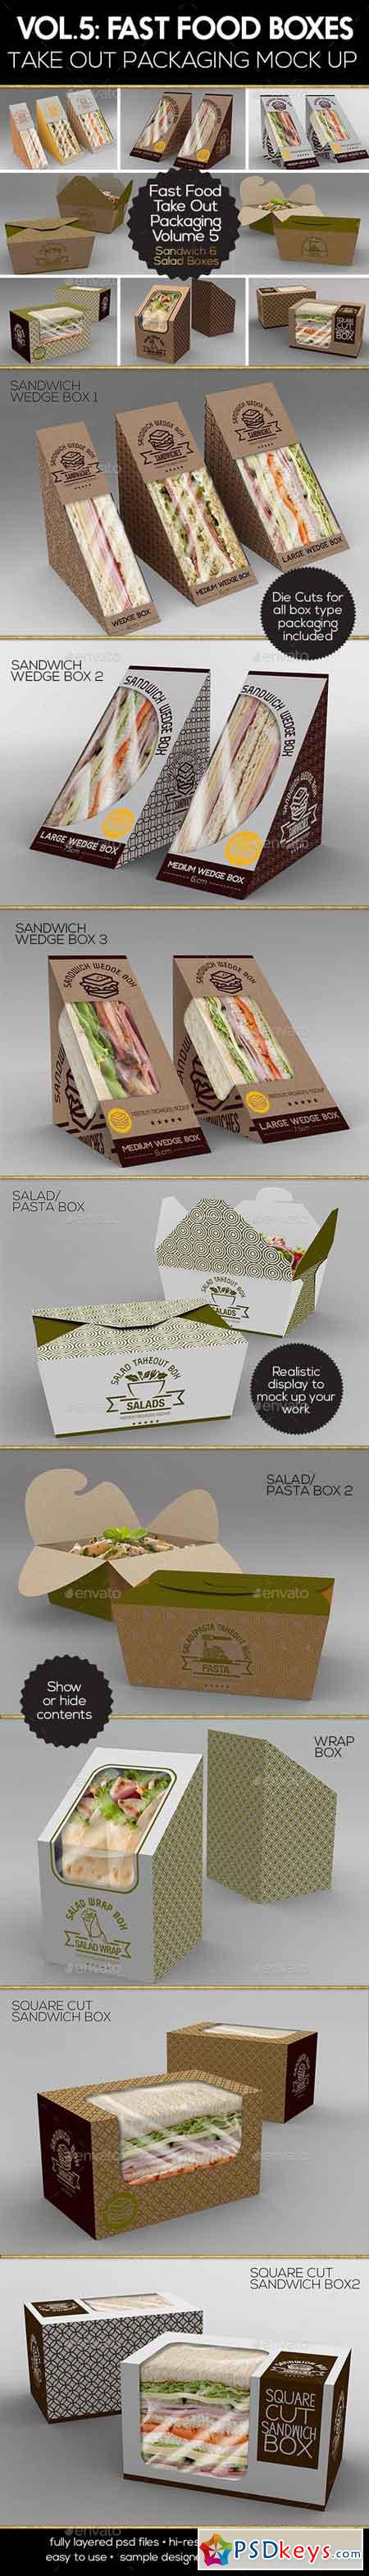 Download Fast Food Boxes Vol.5 Take Out Packaging Mock Ups 18337613 ...